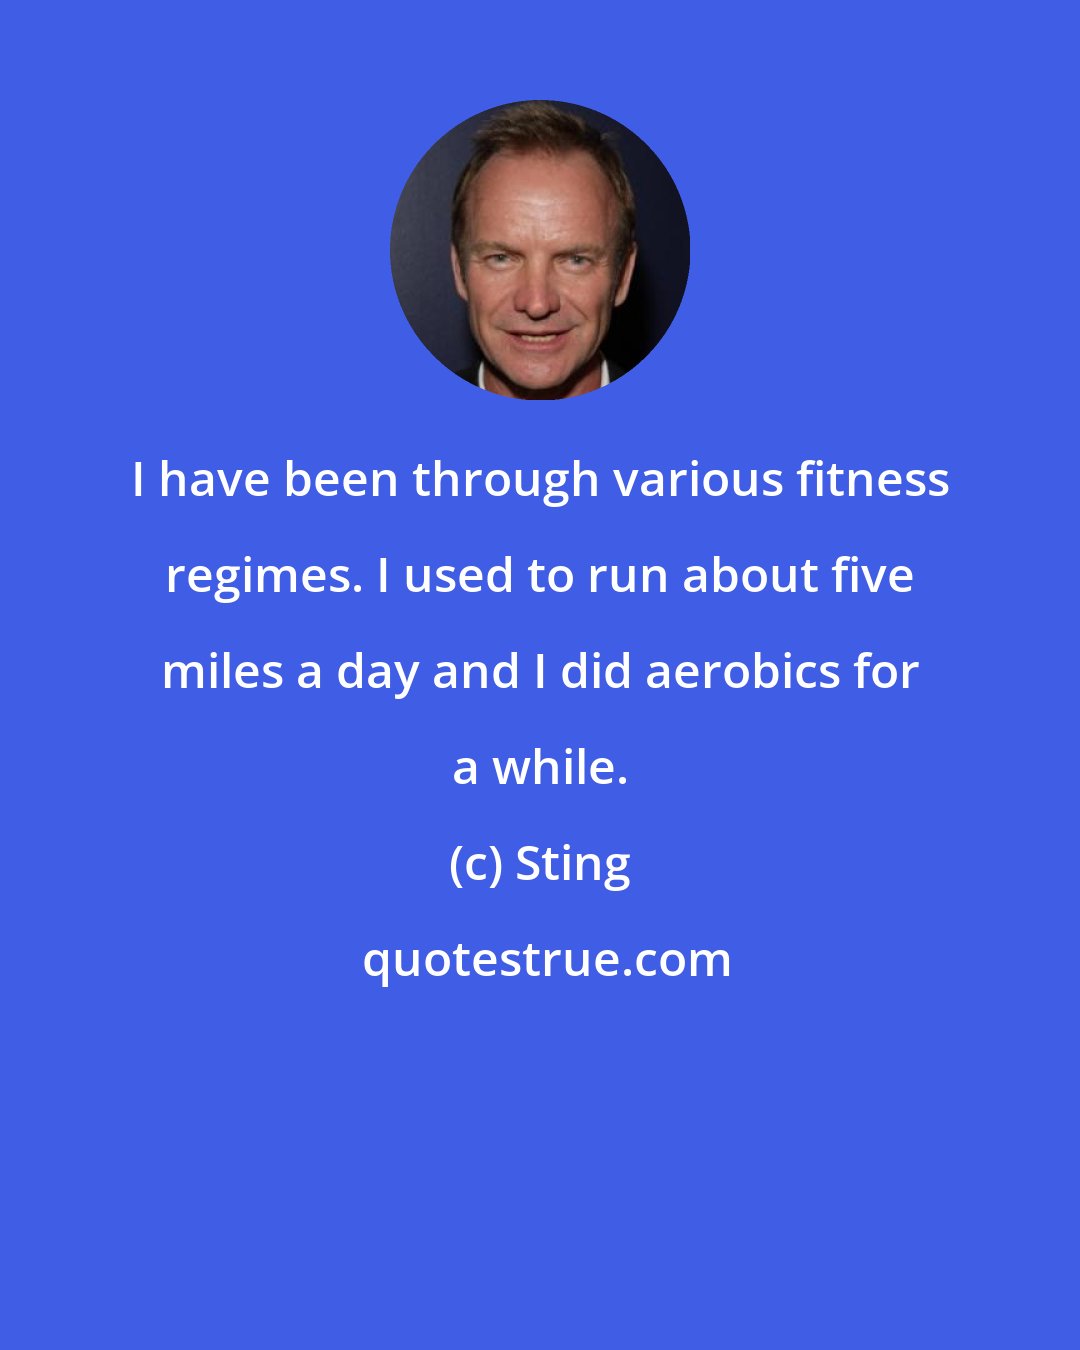 Sting: I have been through various fitness regimes. I used to run about five miles a day and I did aerobics for a while.